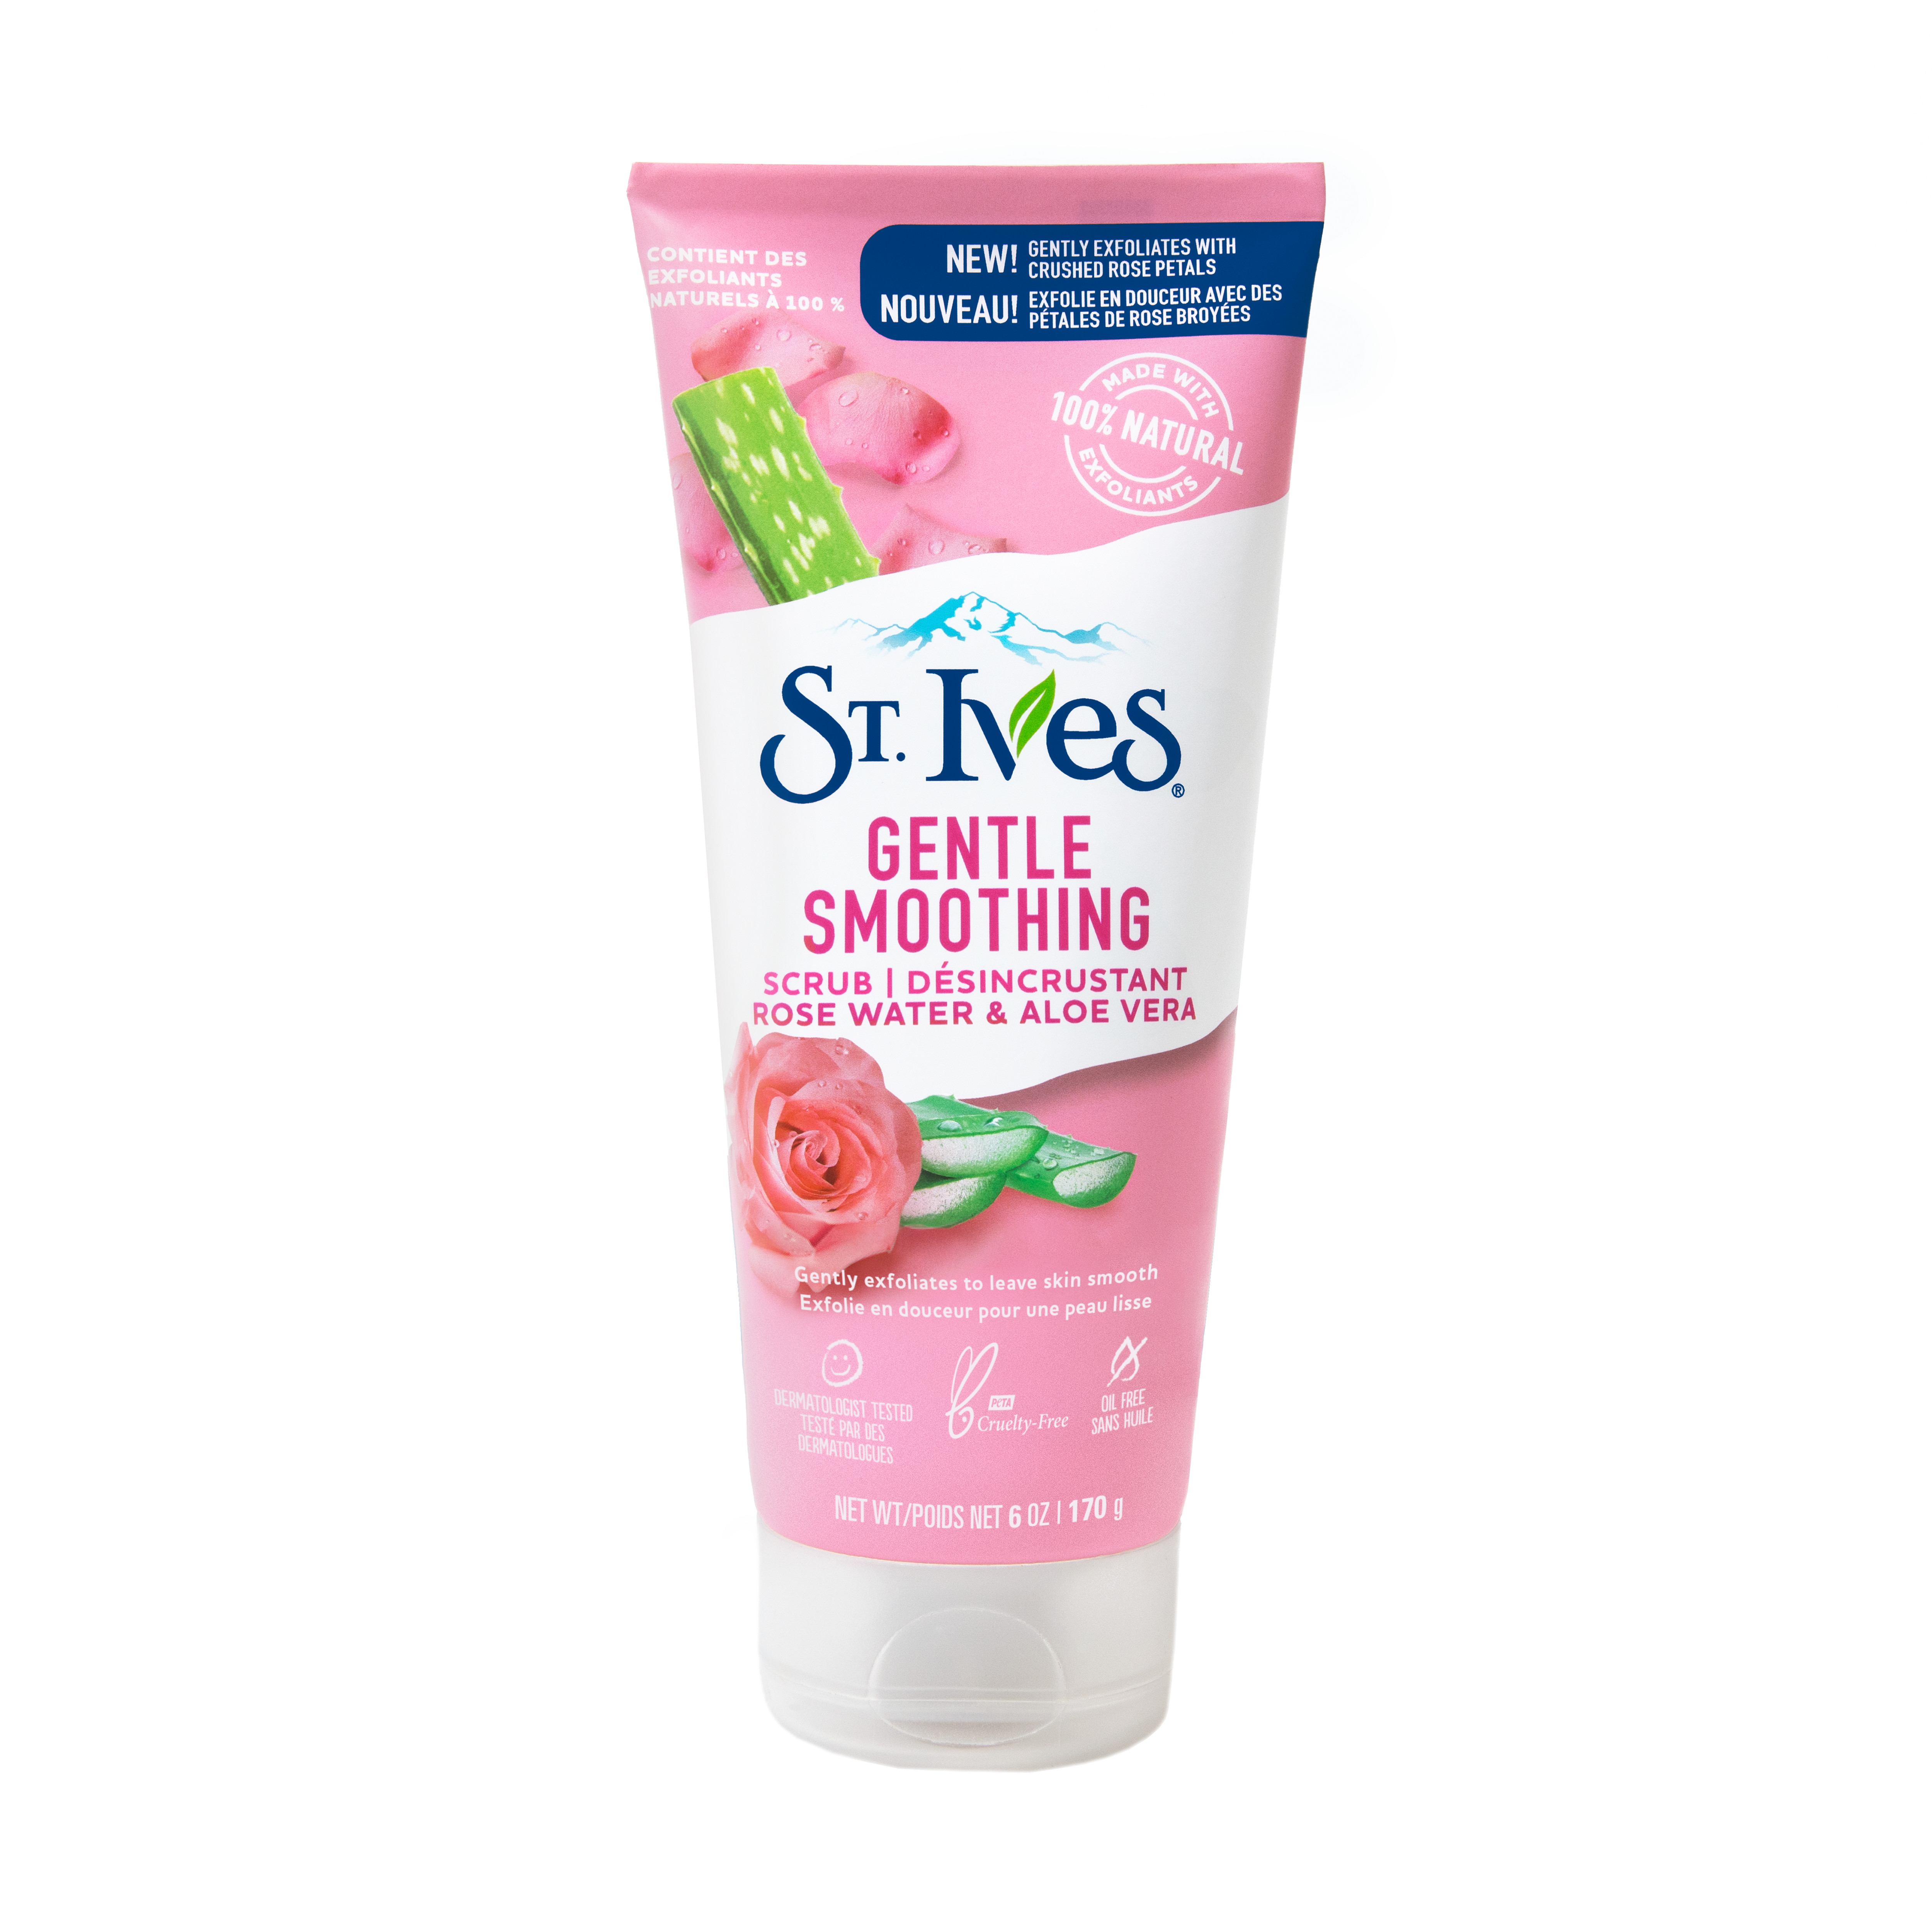 St. Ives Gentle Smoothing Face Scrub Rose Water & Aloe Vera Made with 100% Natural Exfoliants, Paraben Free, Oil-Free, Dermatologist Tested Our Gentlest Scrub Yet 6 oz - image 1 of 5